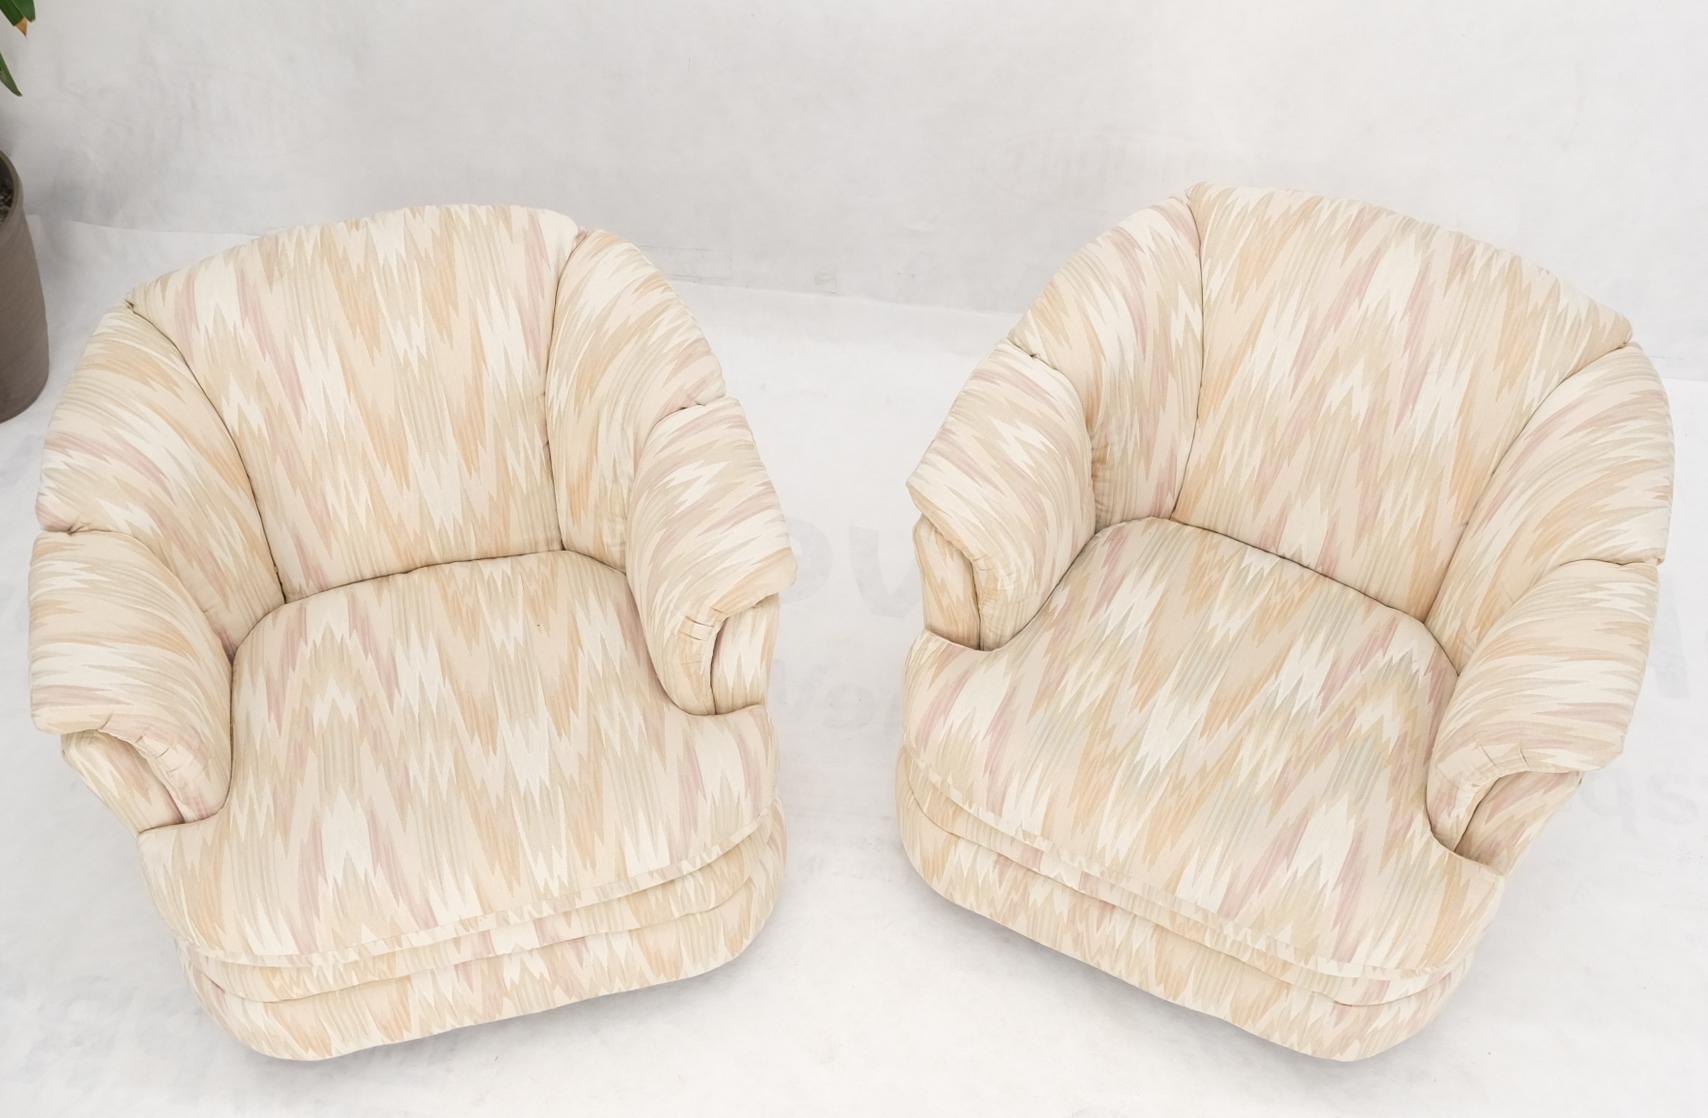 American Pair of Swivel Tiling Mid Century Modern Pod Chairs in Flame Stitch Fabric For Sale